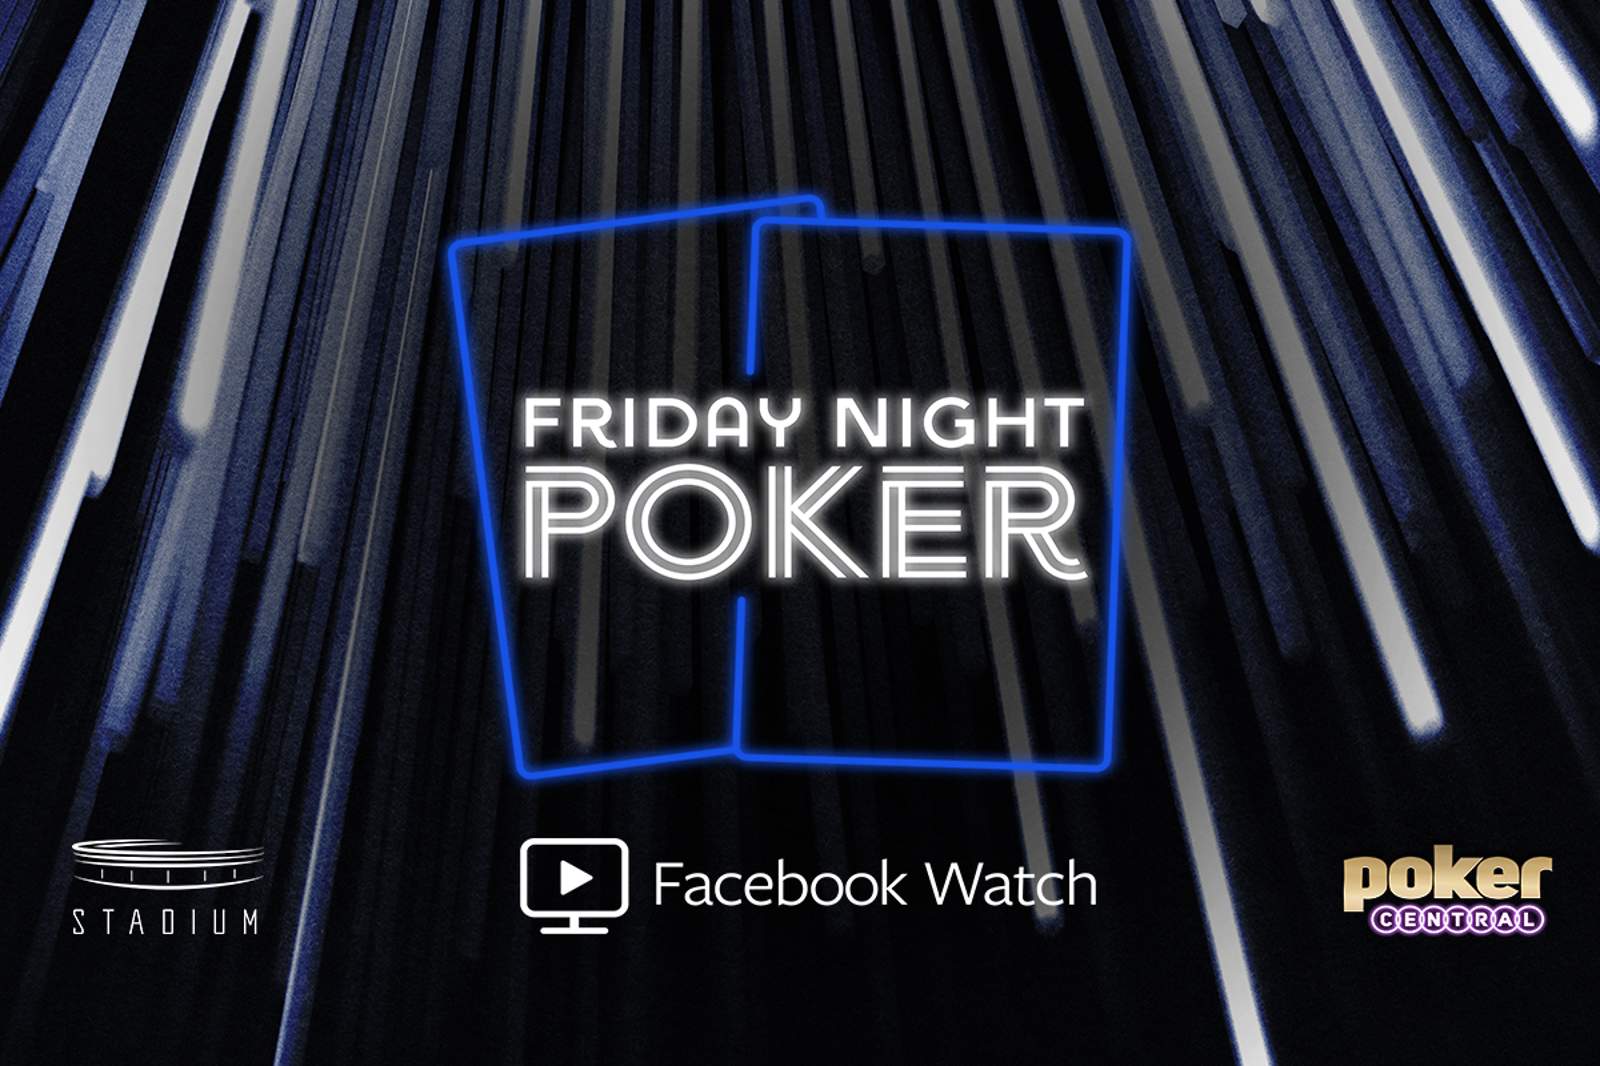 Poker Central and Stadium Launch "Friday Night Poker" on Facebook Watch